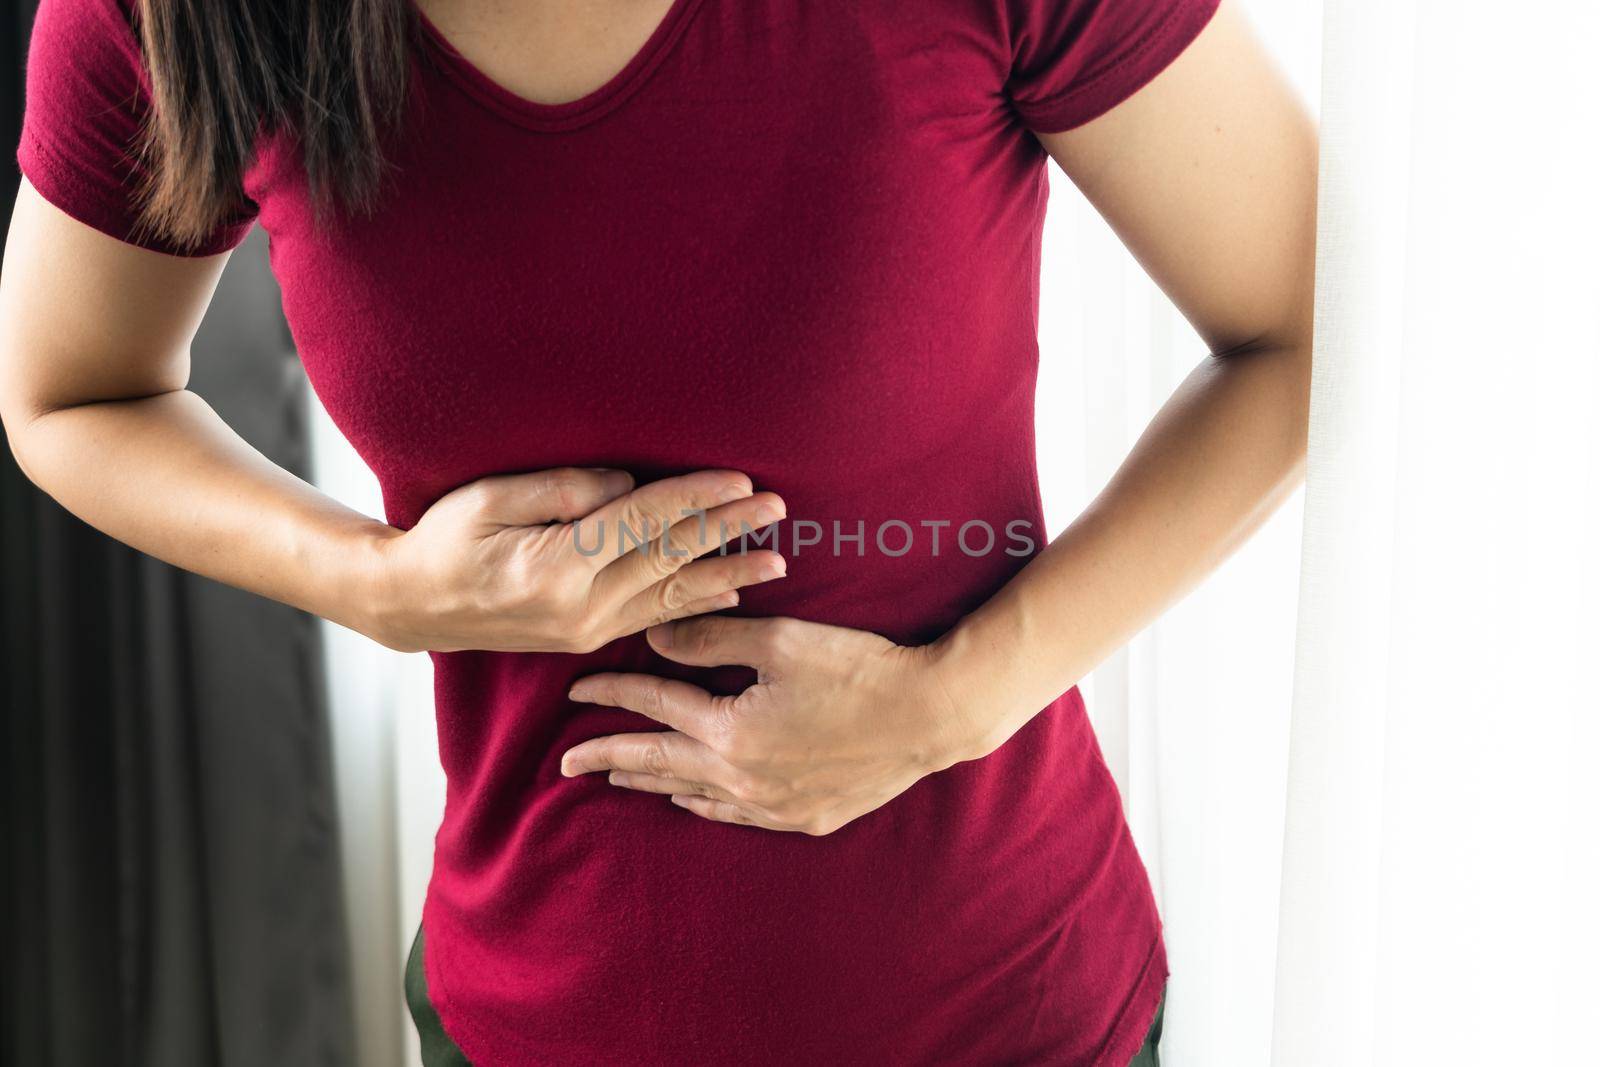 woman Suffering From Acid Reflux Or gastroesophageal reflux at home